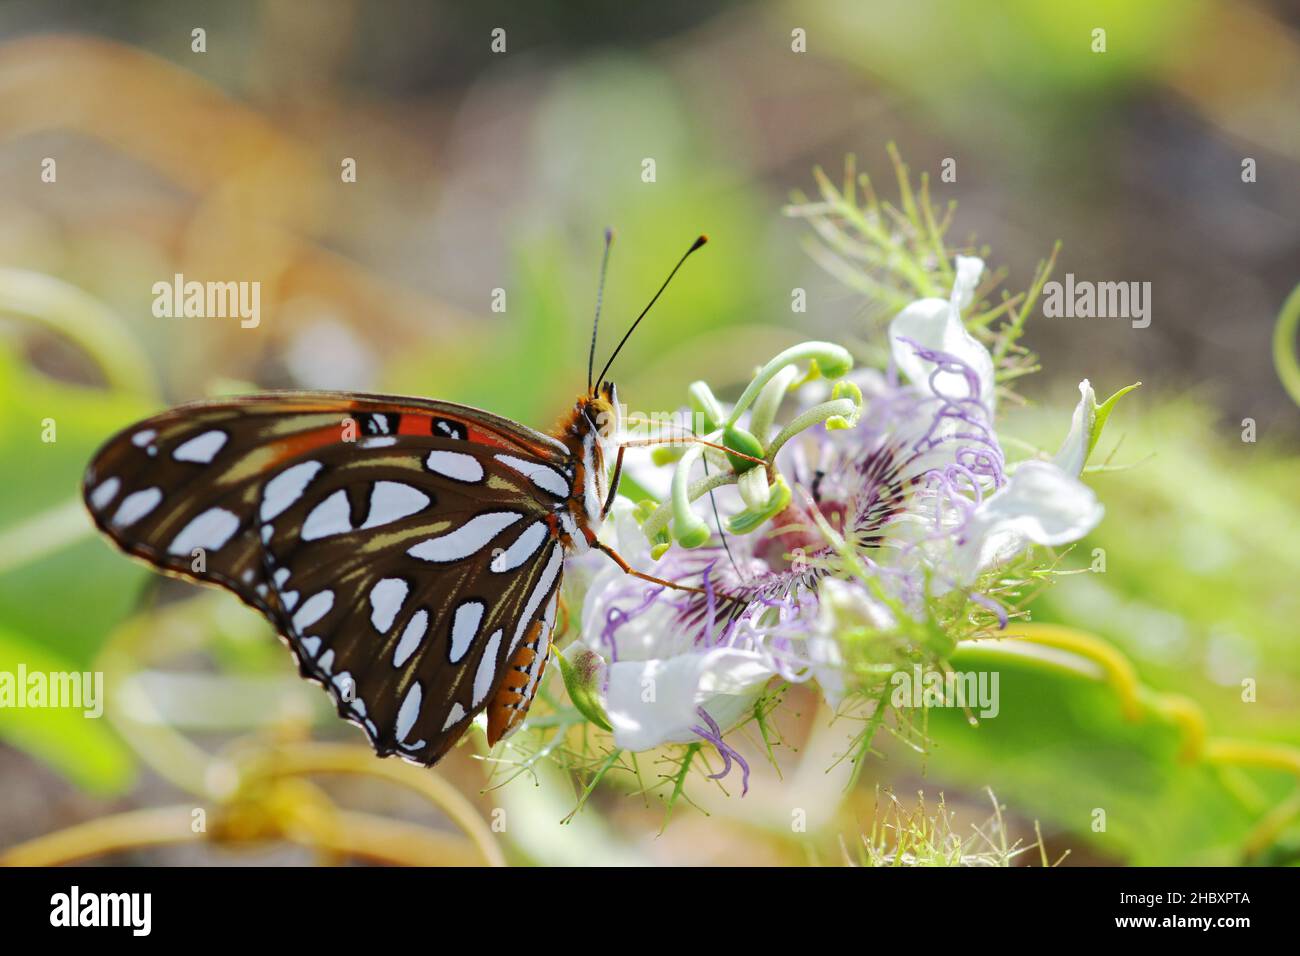 Gulf fritillary (Agraulis vanillae) butterfly on a flower at Isla Holbox, Mexico Stock Photo